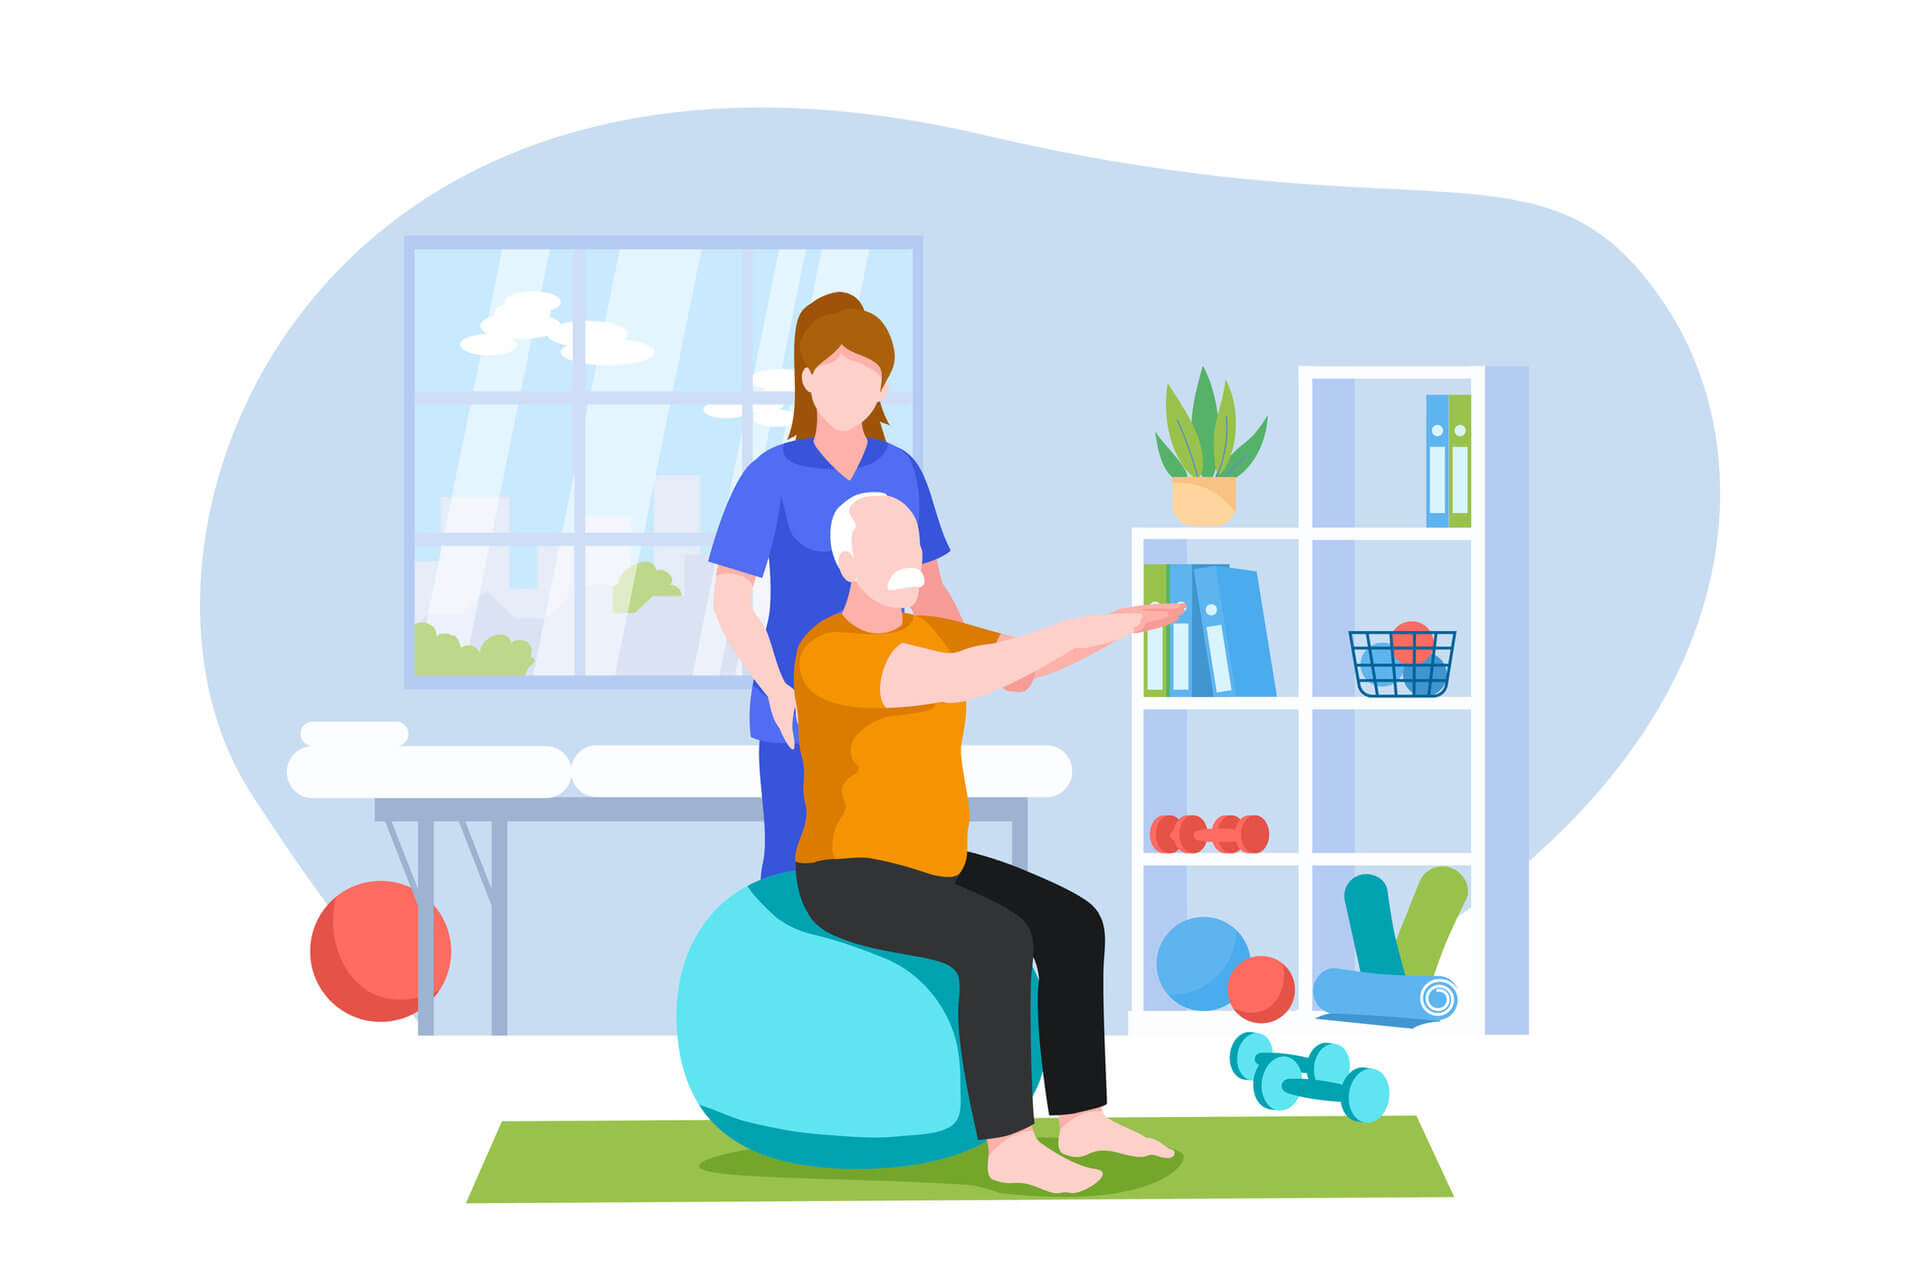 Illustration of a physio assisting an older man to perform mobility exercises